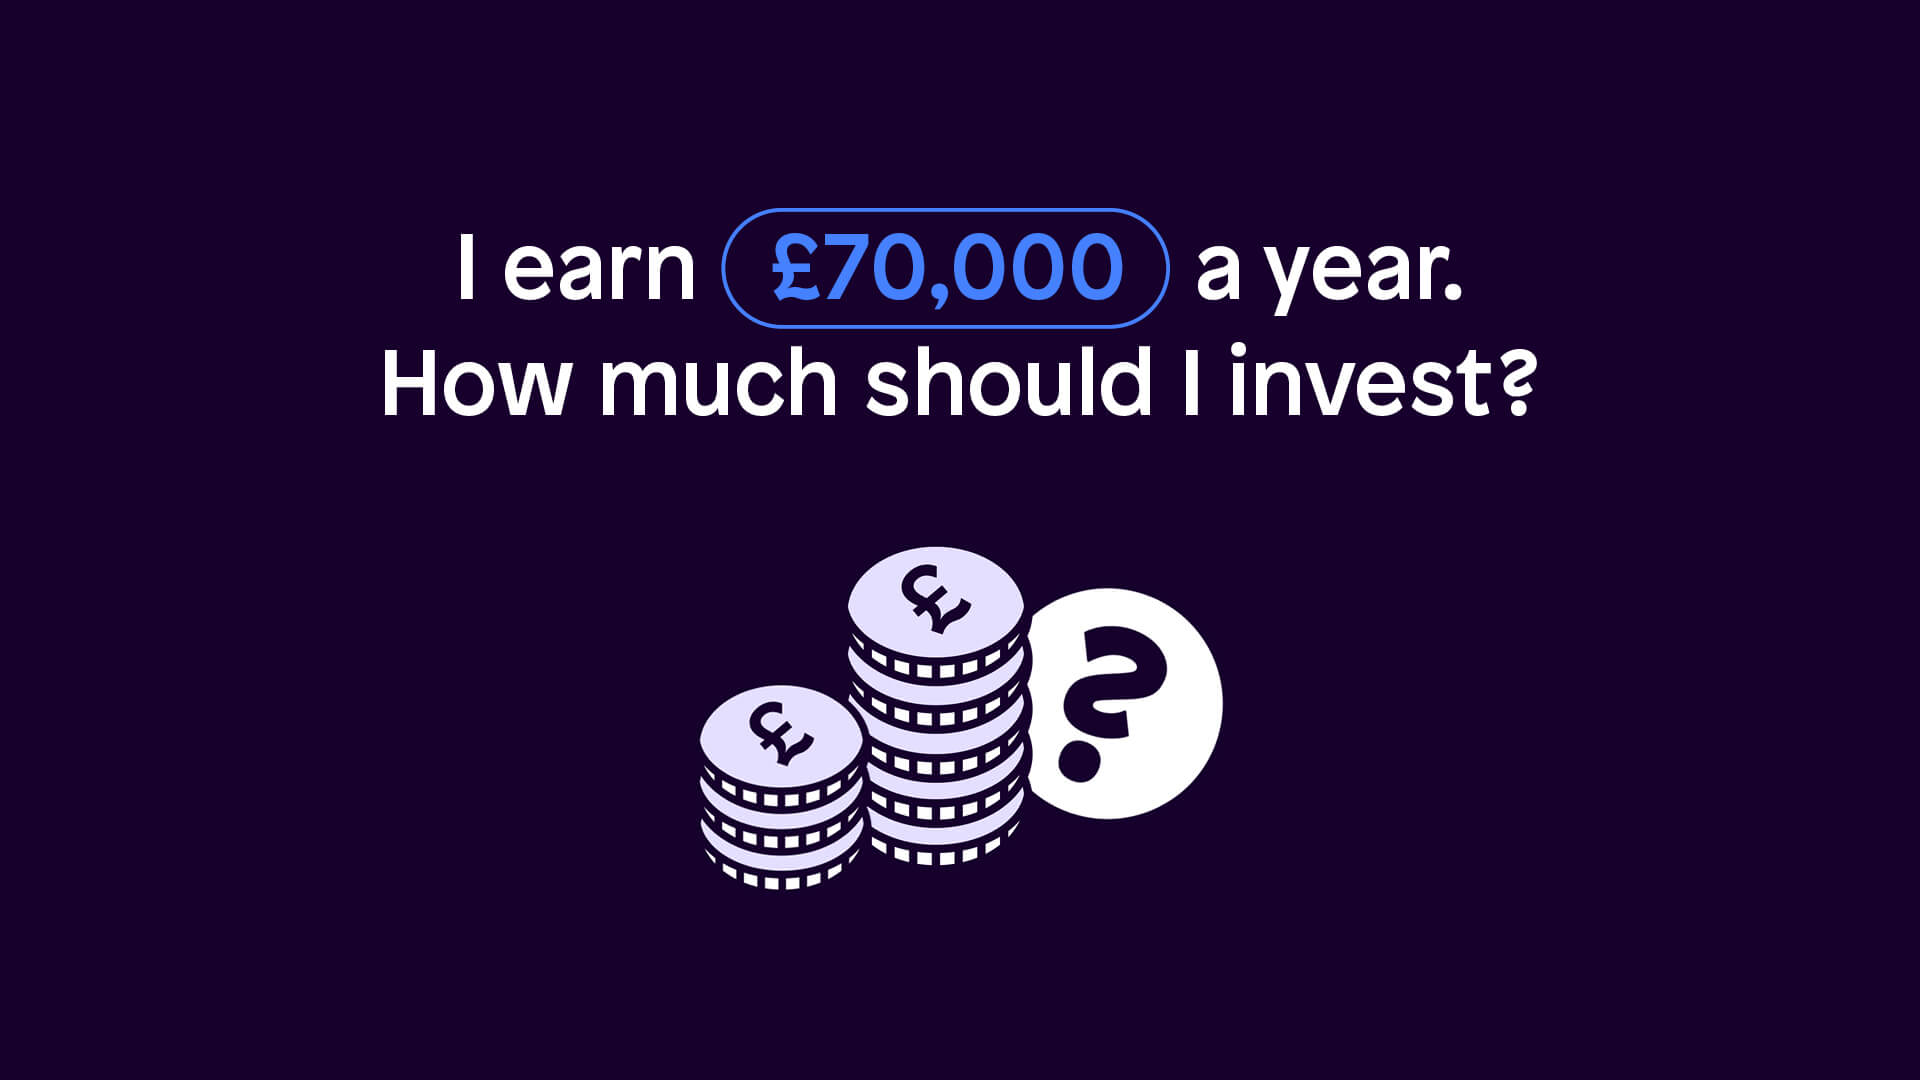 How much should I invest earning £70,000 per year?